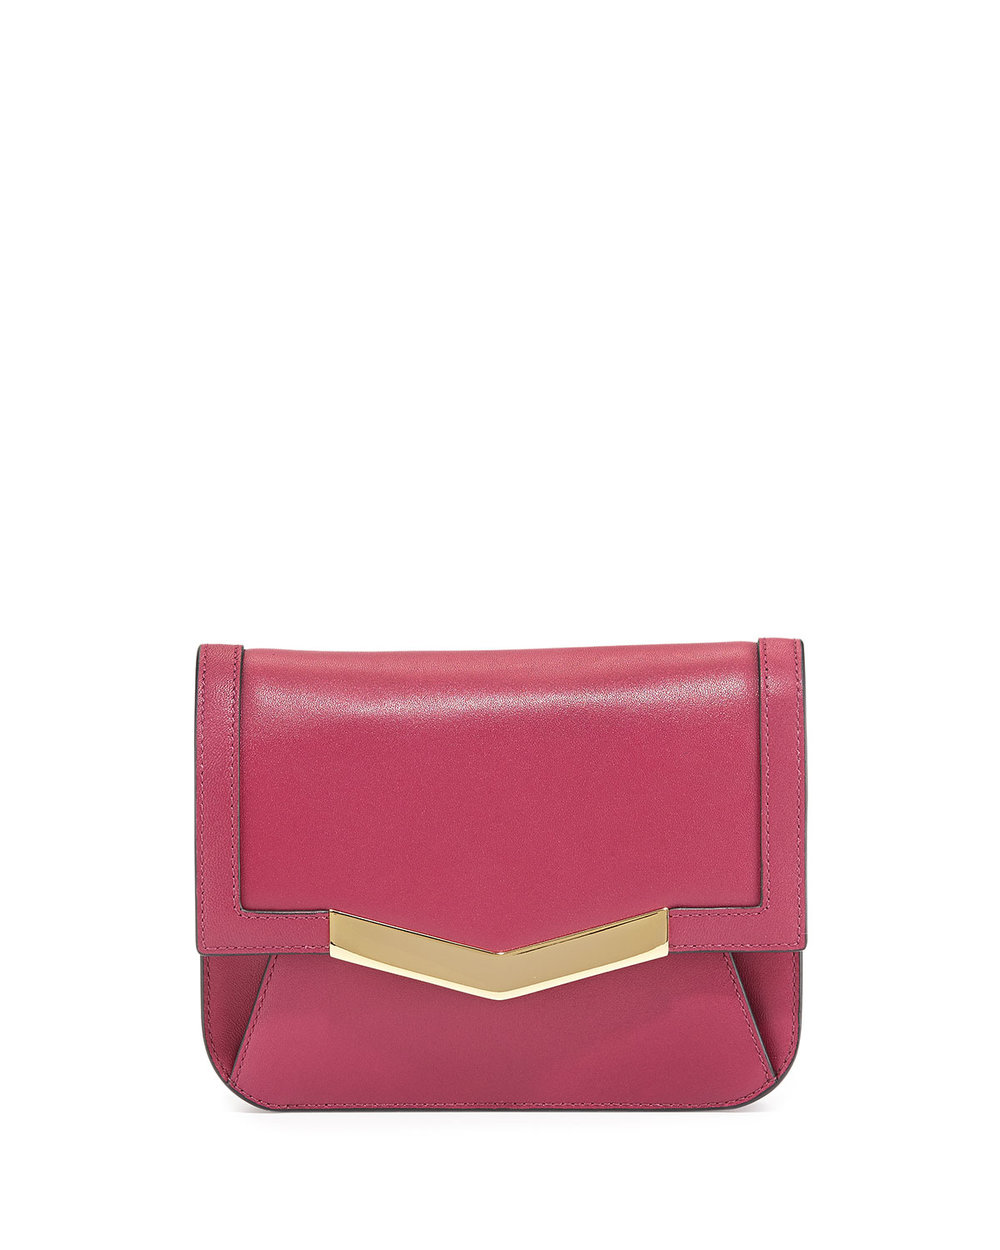   Time's Arrow Calfskin Chevron-Detail Belt Bag, Dahlia. Last Call Neiman Marcus. Was: $275. Now: $115 because the Friends and Family event is happening! 40% off for card holders w/ code: FRIEND40 or 30% off  for everyone until March 8th! 